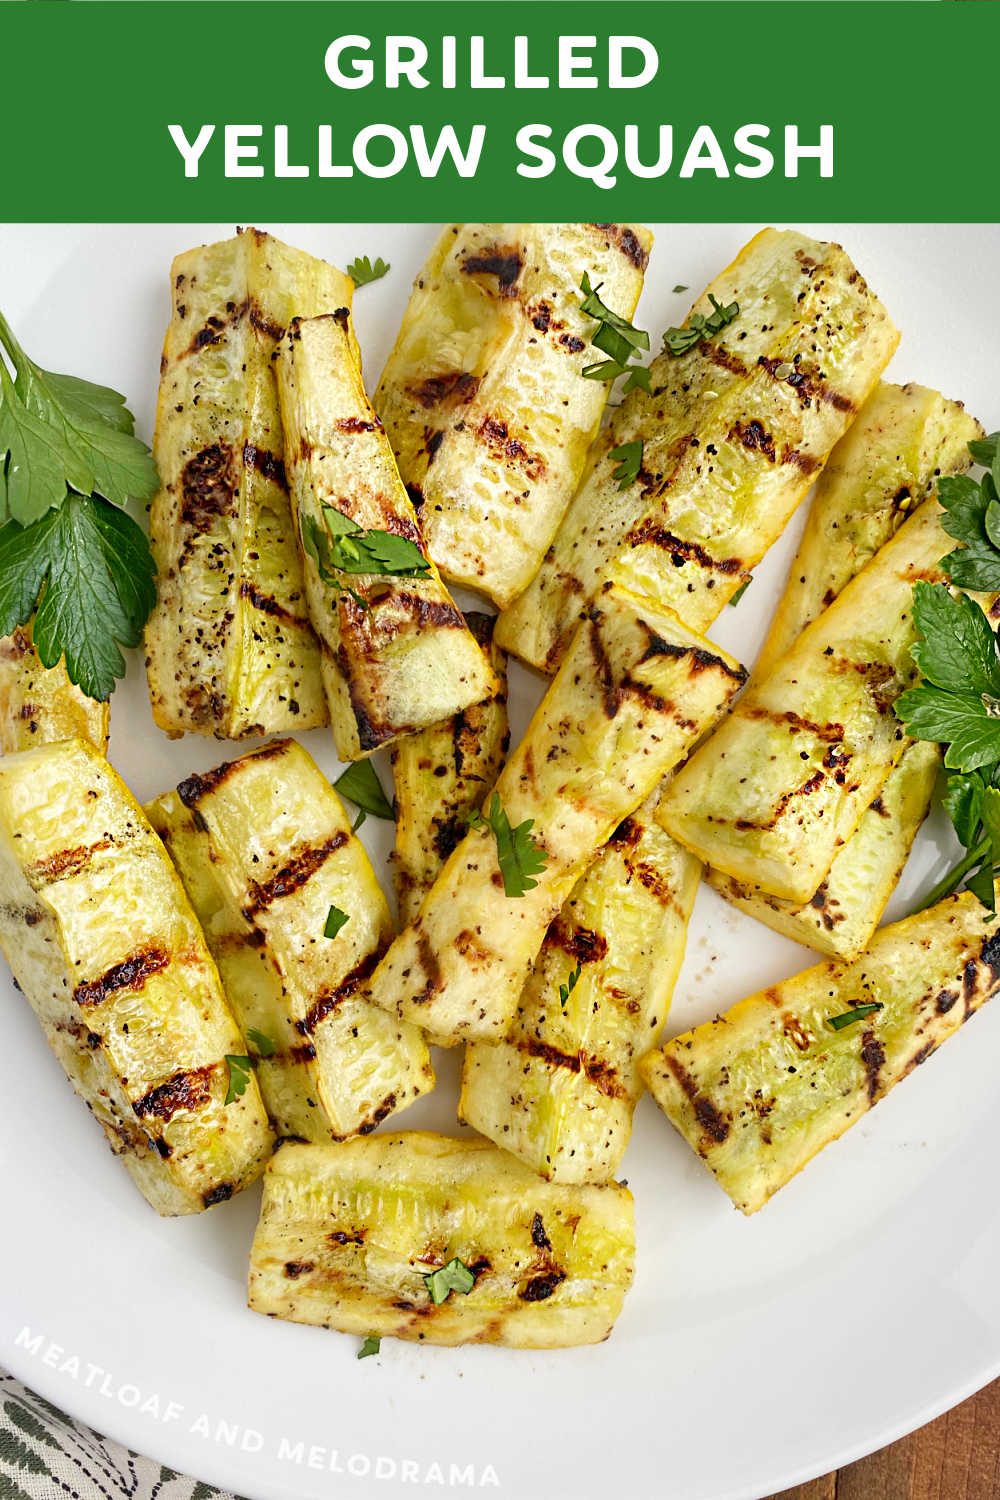 Grilled Yellow Squash, or summer squash, is an easy healthy summer side dish recipe that takes minutes to cook on the grill. You only need 4 ingredients to make this recipe, and it goes perfectly with chicken, beef, pork or seafood! via @meamel